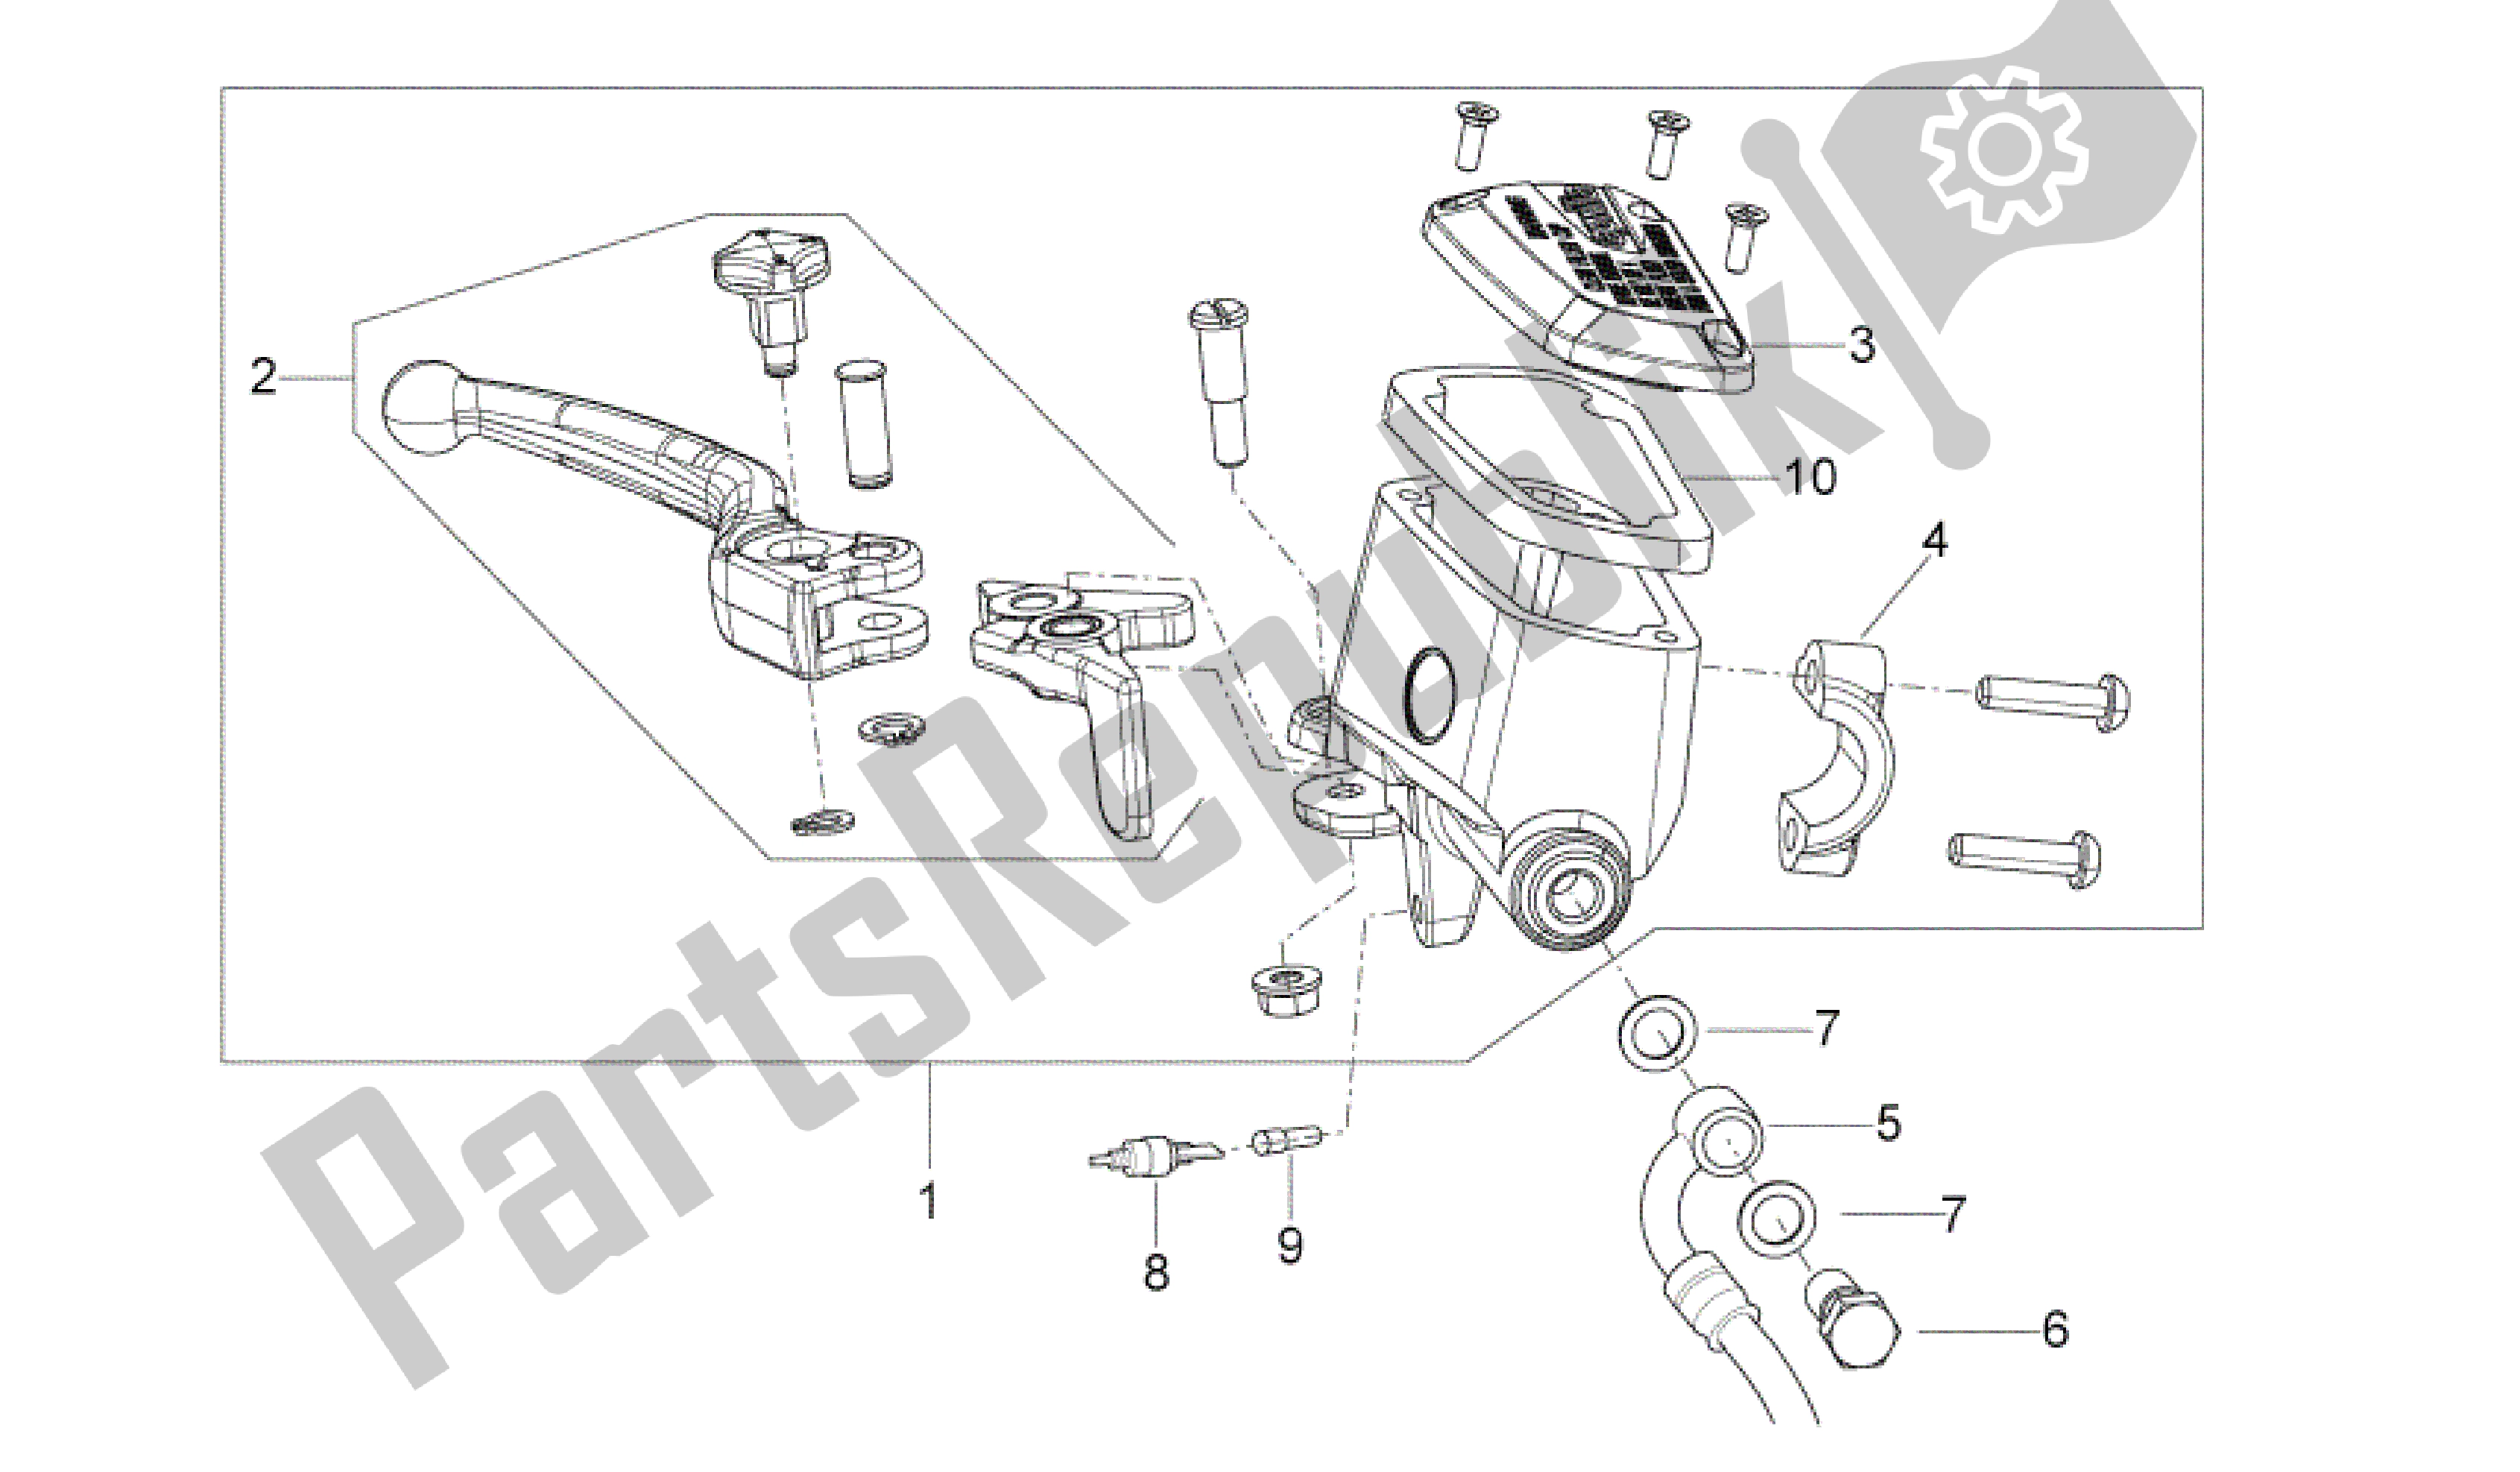 All parts for the Front Master Cilinder of the Aprilia Shiver 750 2007 - 2009